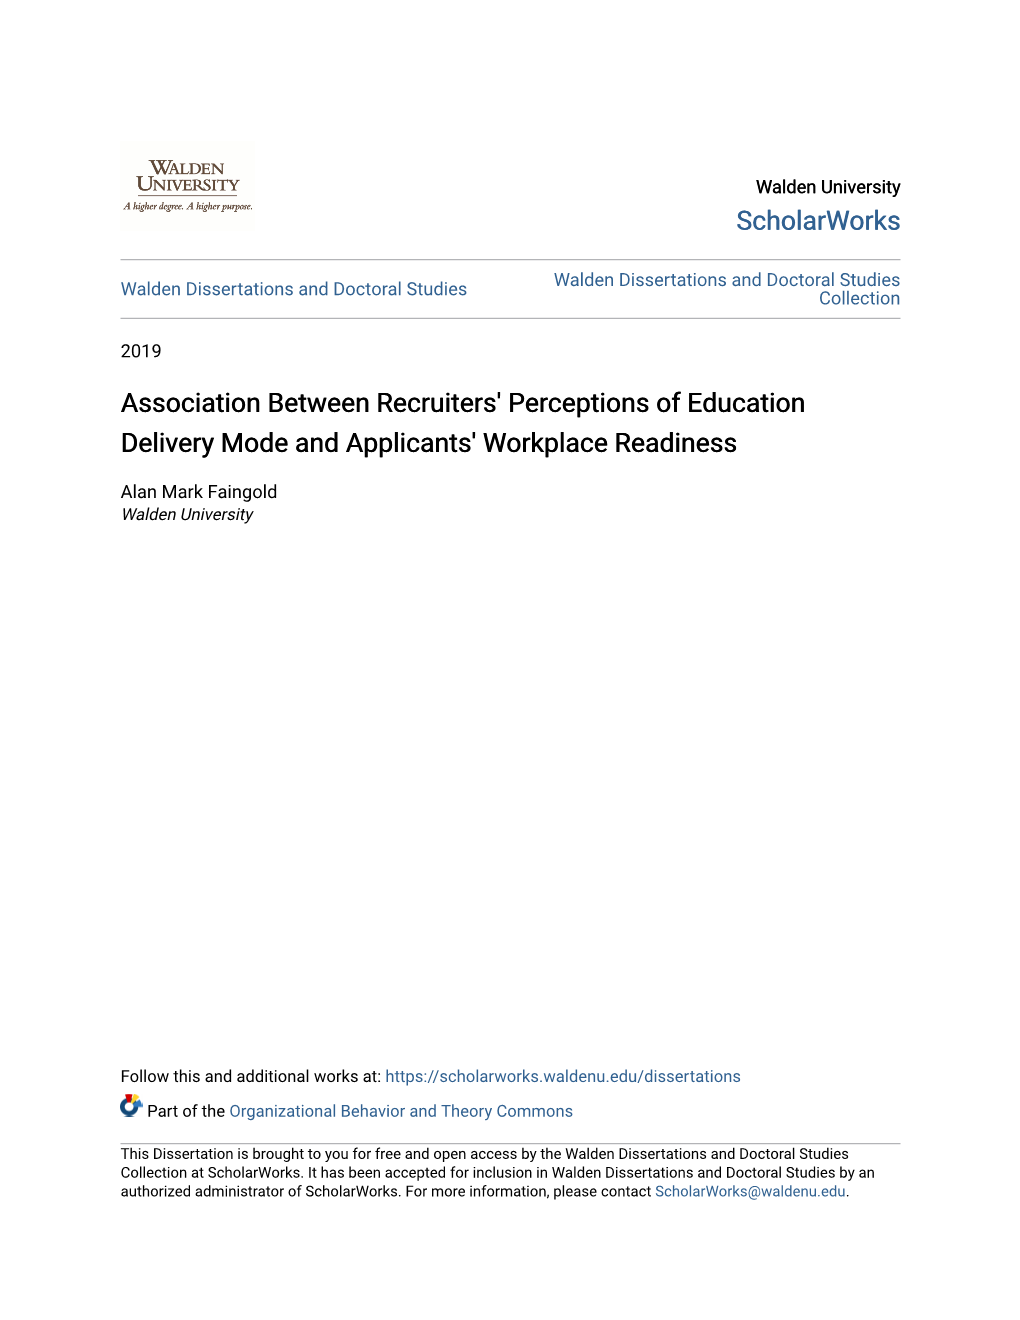 Association Between Recruiters' Perceptions of Education Delivery Mode and Applicants' Workplace Readiness